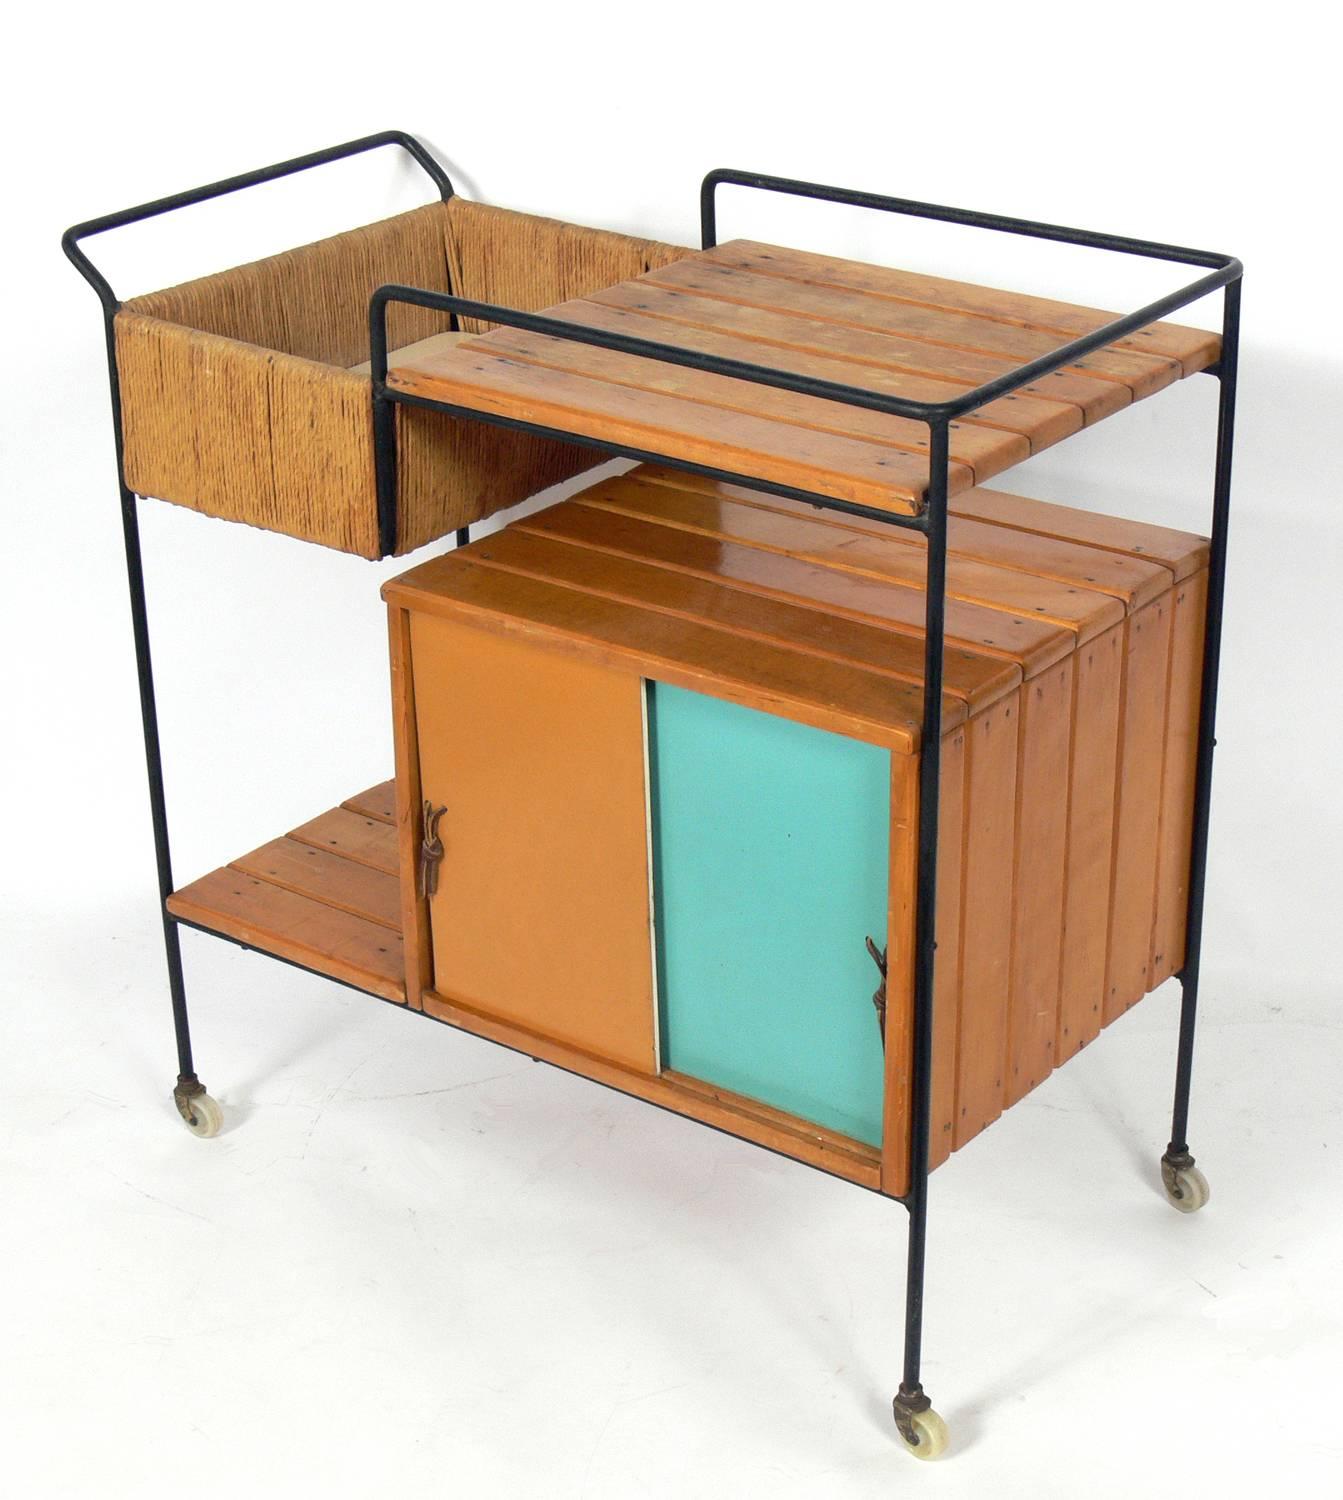 Colorful bar cart by Arthur Umanoff, American, circa 1950s. The top will be refinished and this refinishing of the top is included in the price noted below.